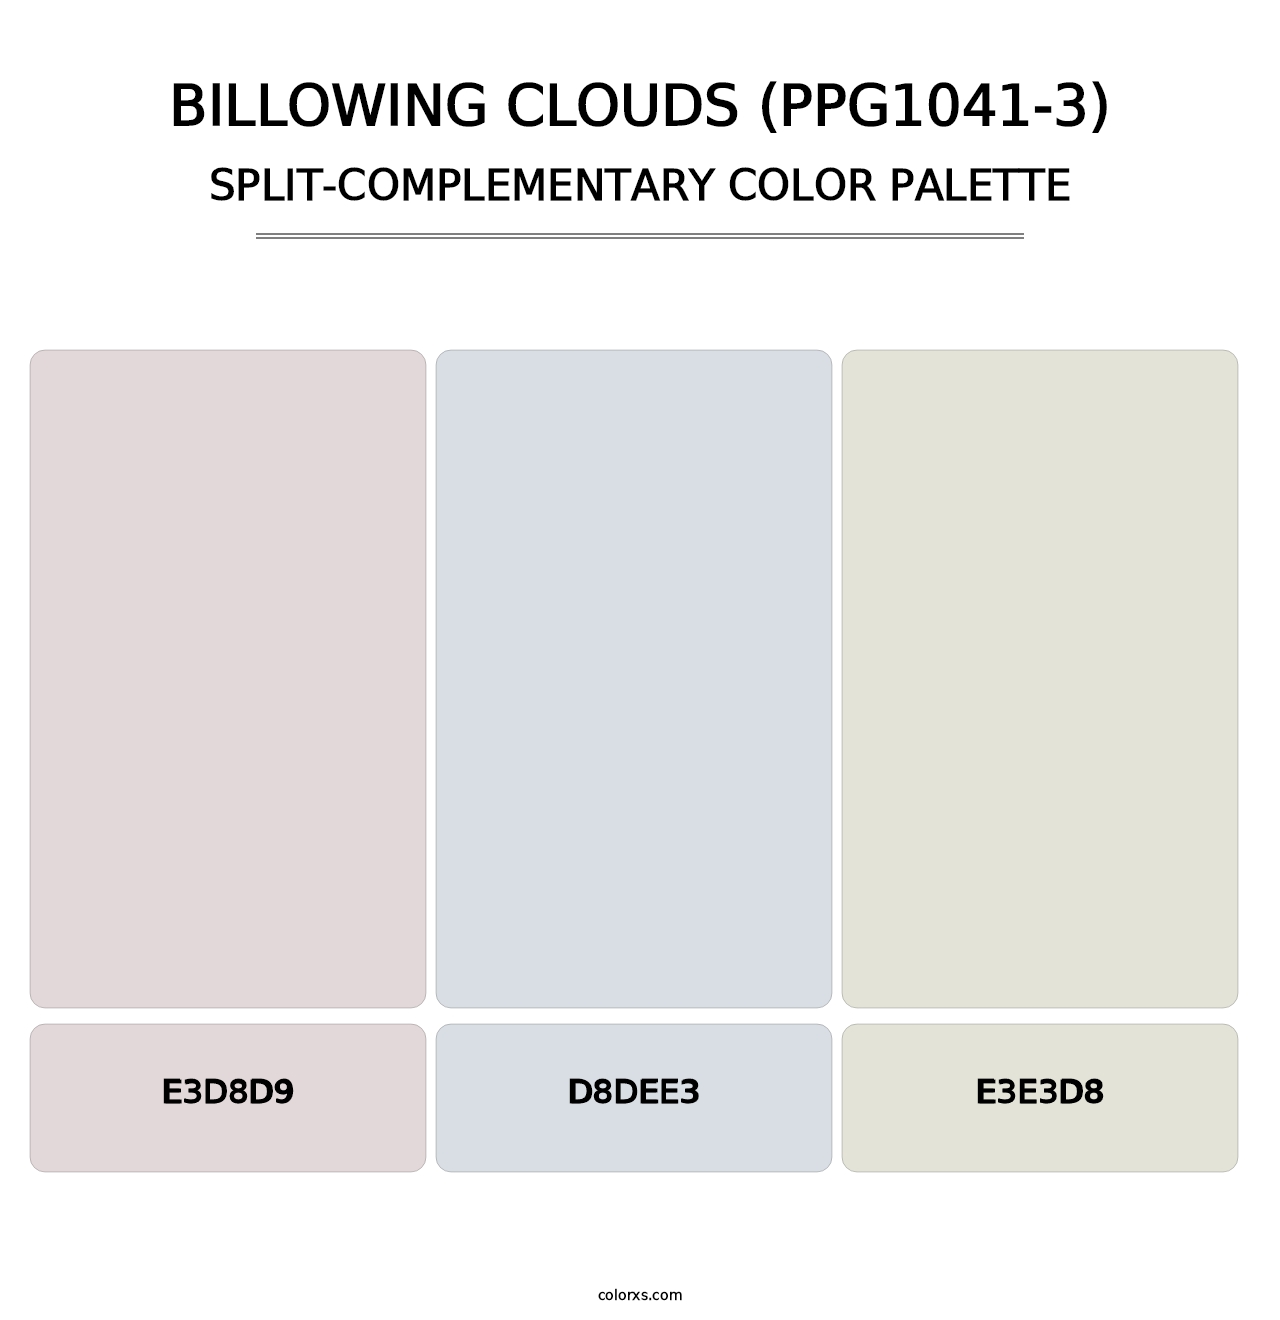 Billowing Clouds (PPG1041-3) - Split-Complementary Color Palette